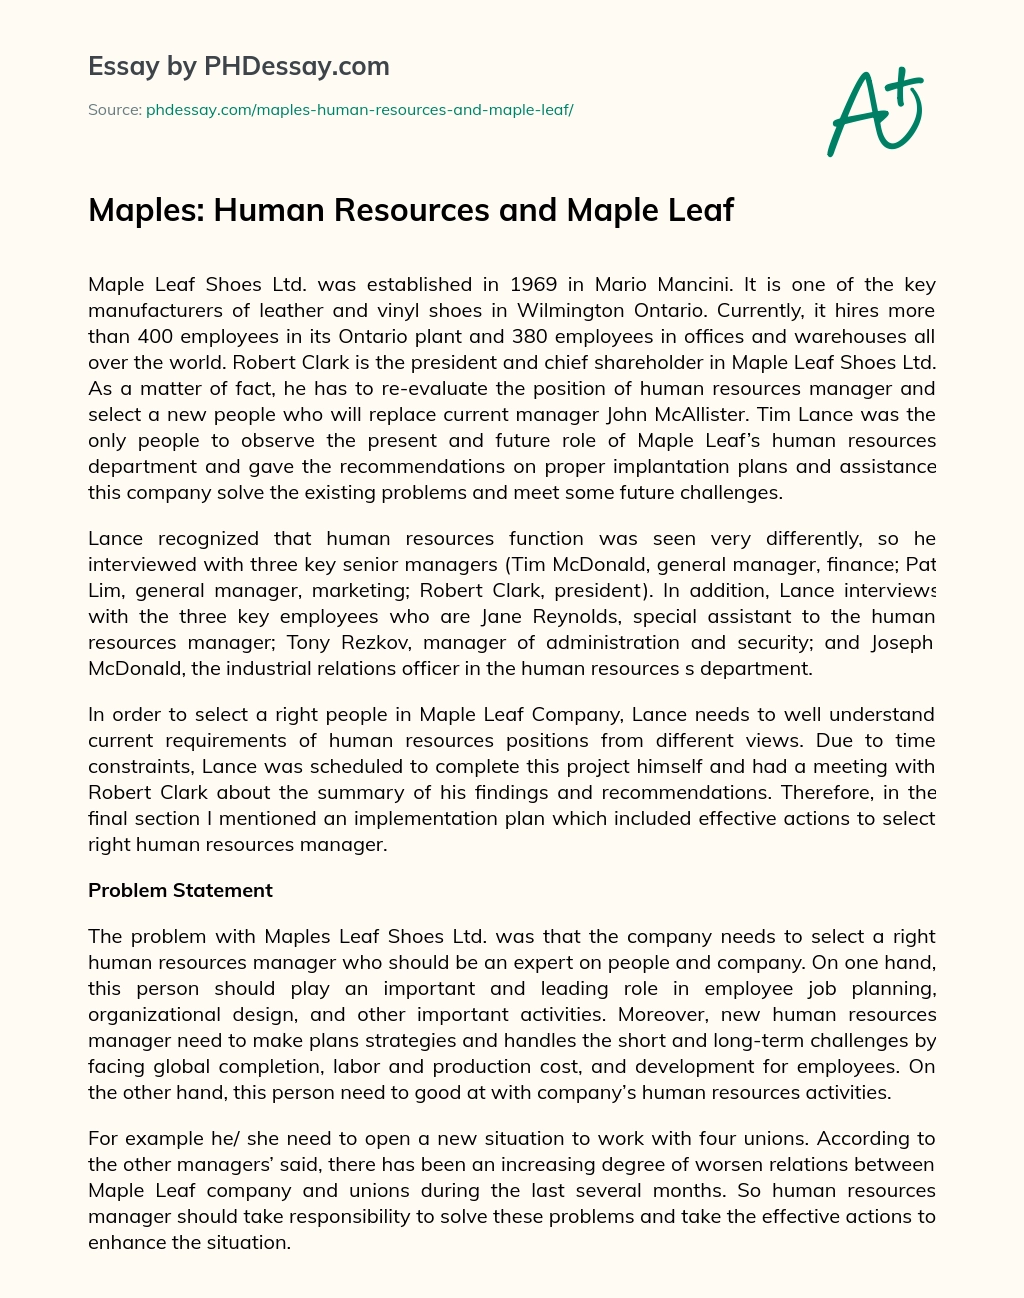 Maples: Human Resources and Maple Leaf essay